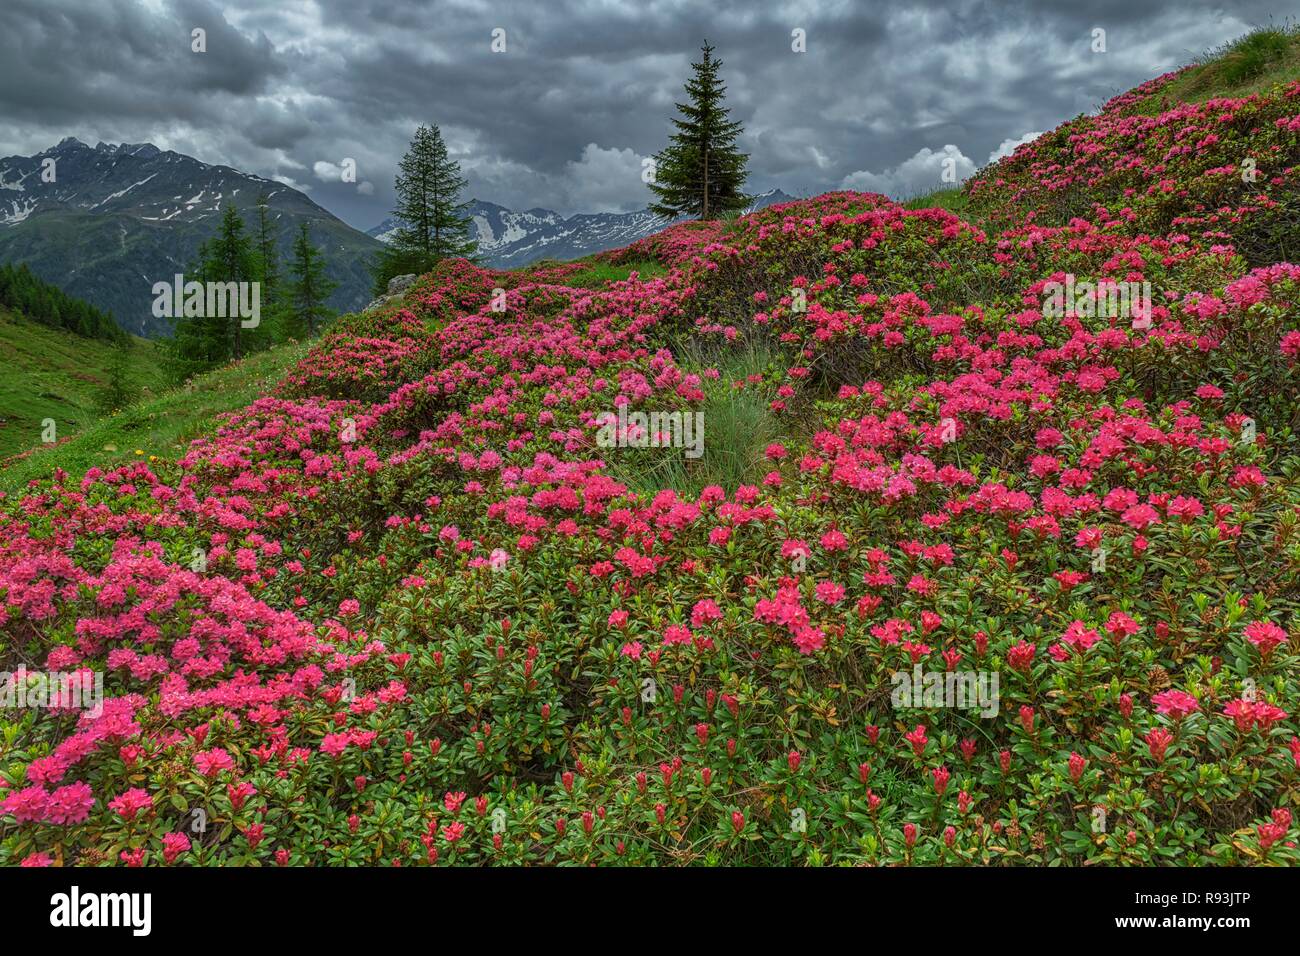 Rusty-leaved alpenrose (Rhododendron ferrugineum), flowering, stormy atmosphere, Hohe Tauern National Park, Carinthia, Austria Stock Photo